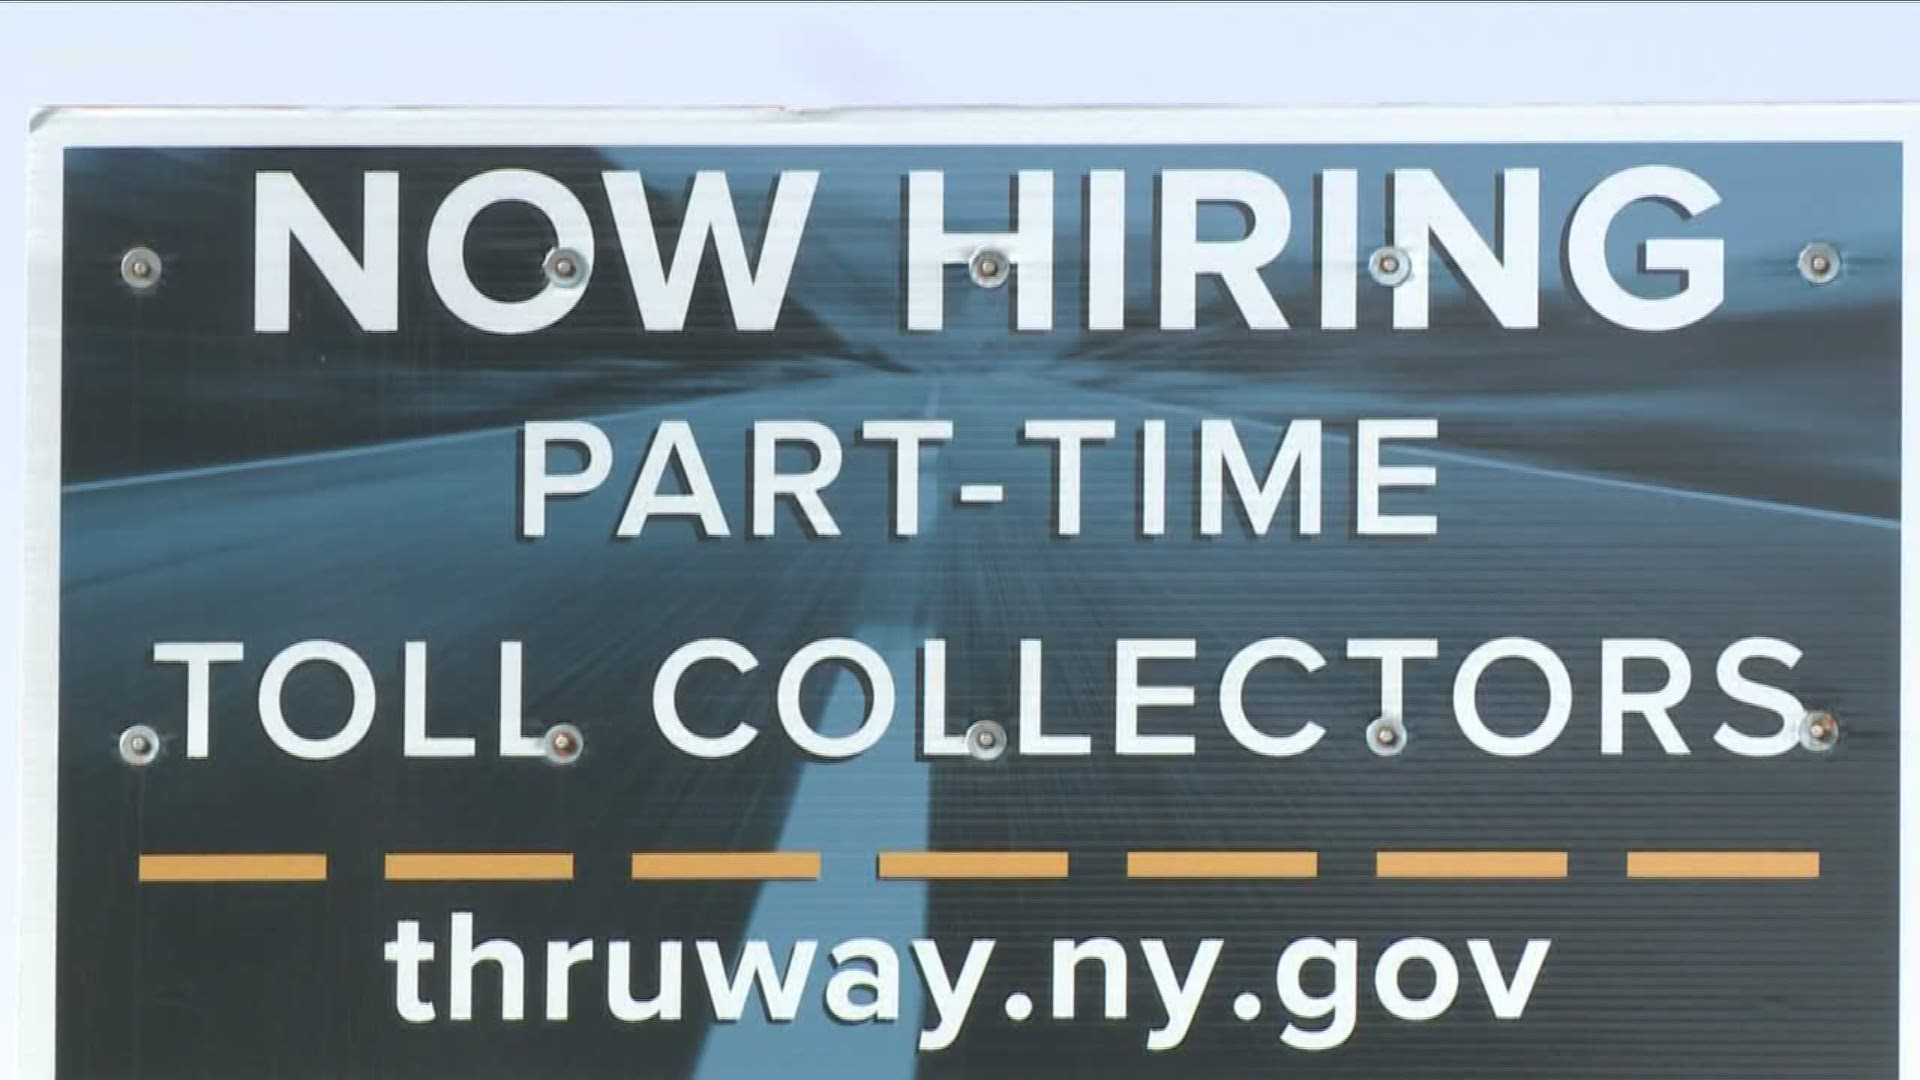 The NYS Thruway Authority needs to keep tolls fully staffed until NY goes cashless in 2020. But why should someone take a short-term job?